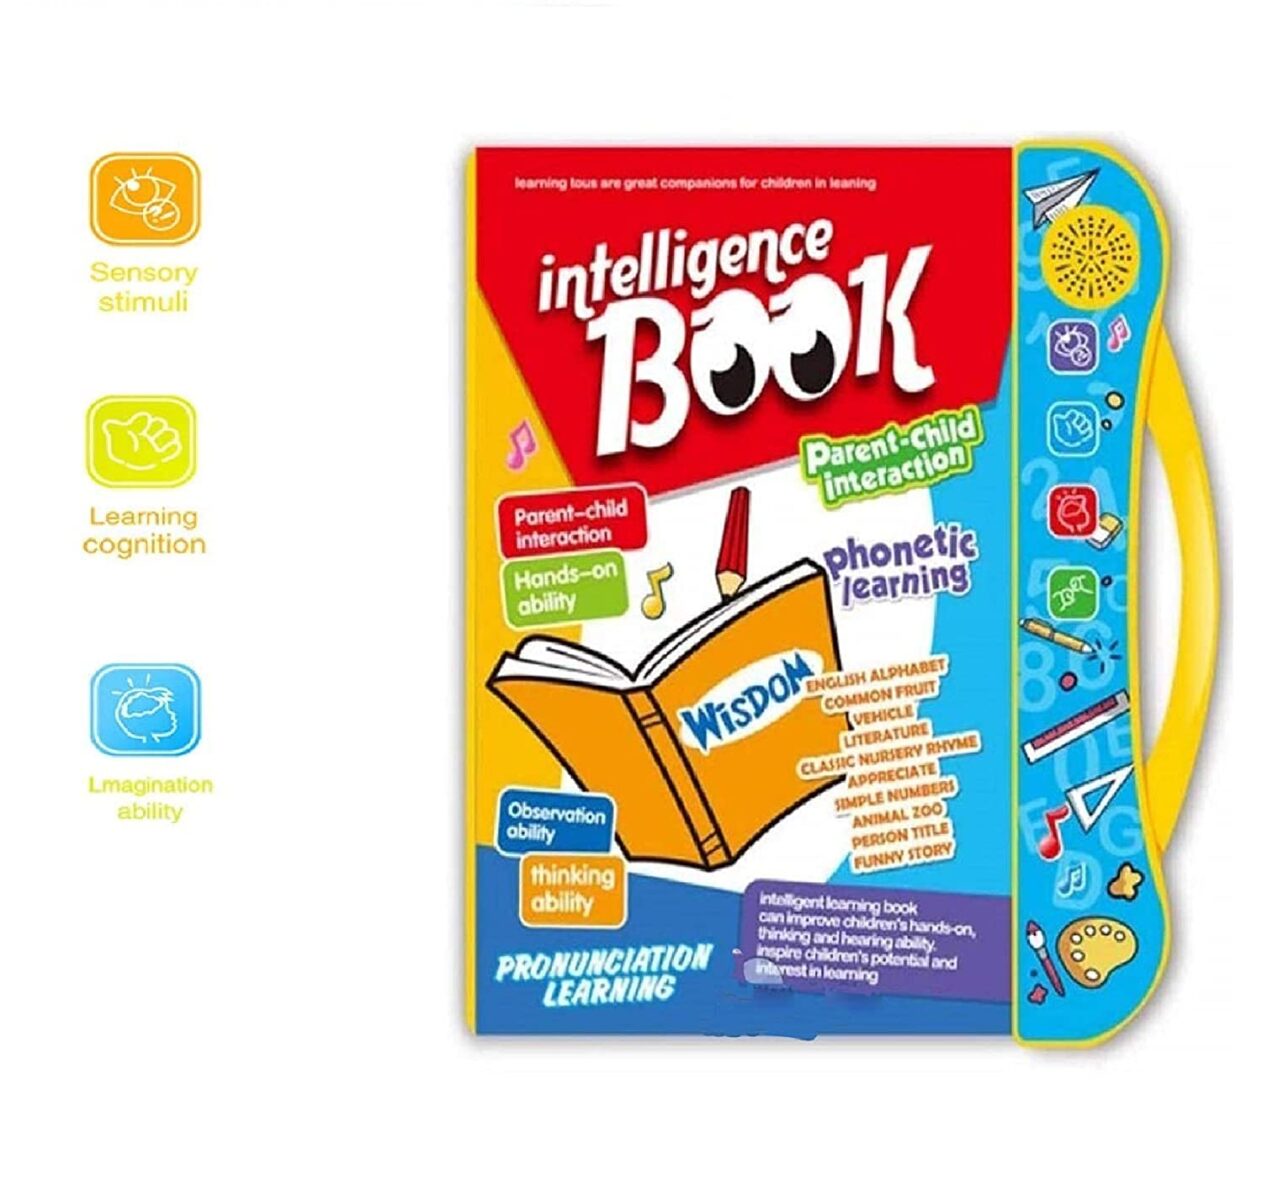 Kids Intelligence Book English Letters & Words Learning Sound Book, Fun Educational Toys. Activities with Numbers, Shapes, Animals Phonetic Learning book for Toddlers.